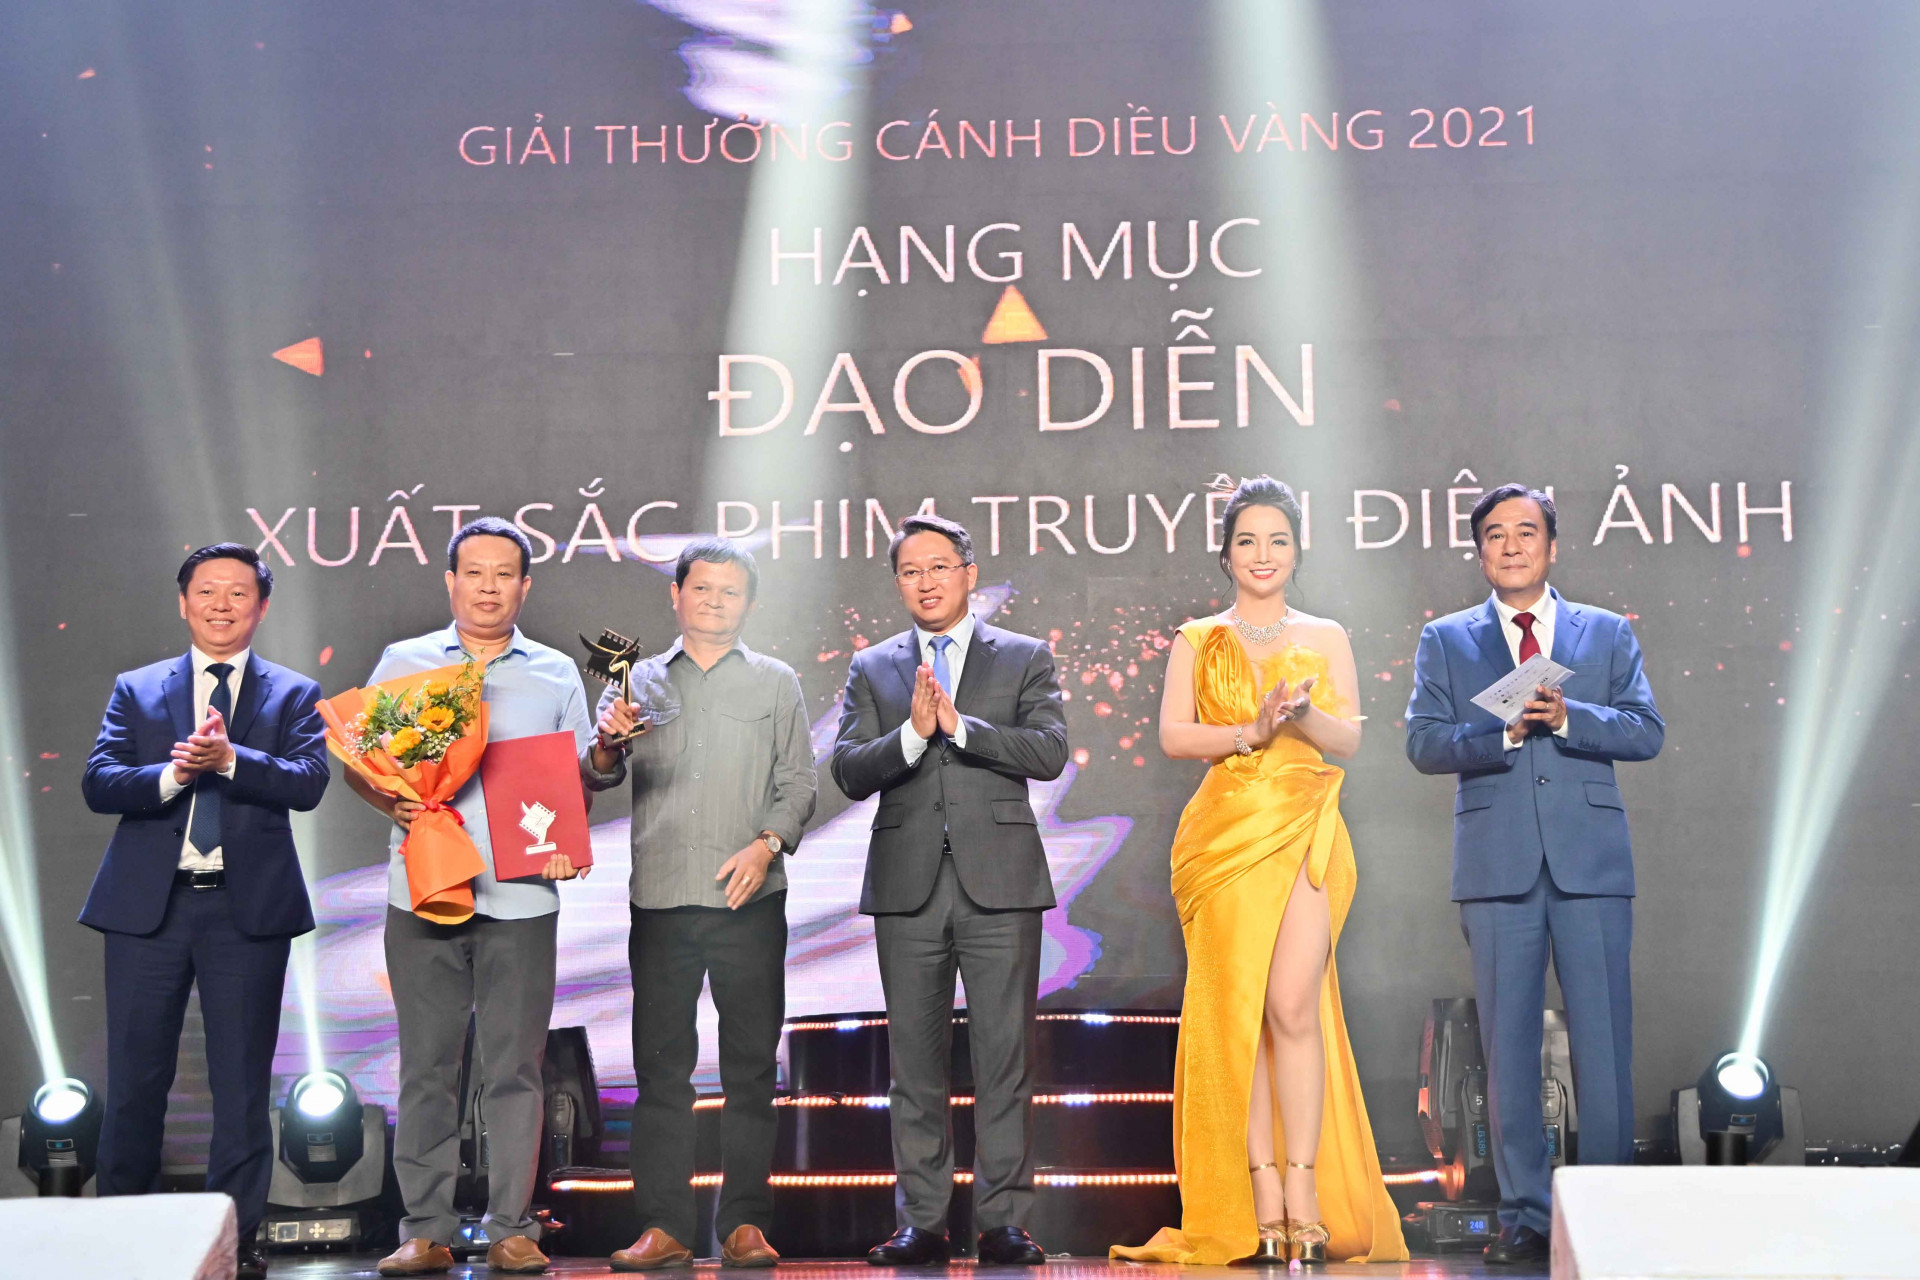 Nguyen Hai Ninh offering gold prize to best director in movie category